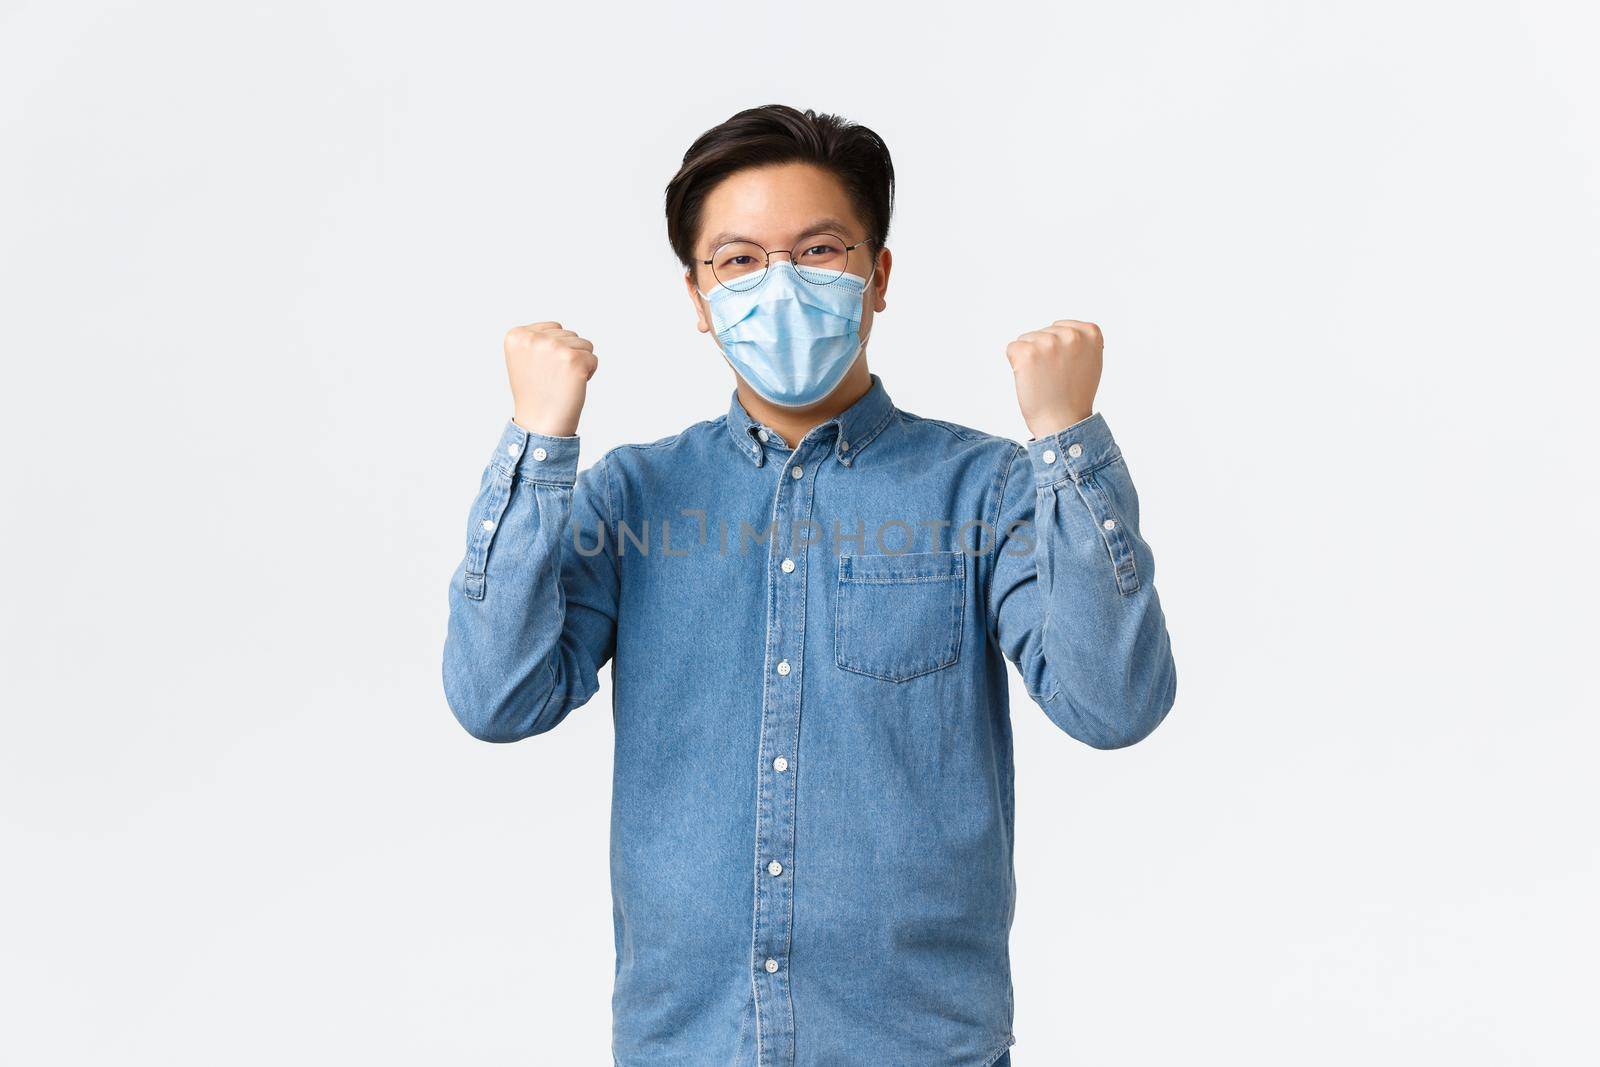 Covid-19, preventing virus, and social distancing at workplace concept. Successful winning asian man encourage team wear medical masks to fight coronavirus, raising hands up triumphing.